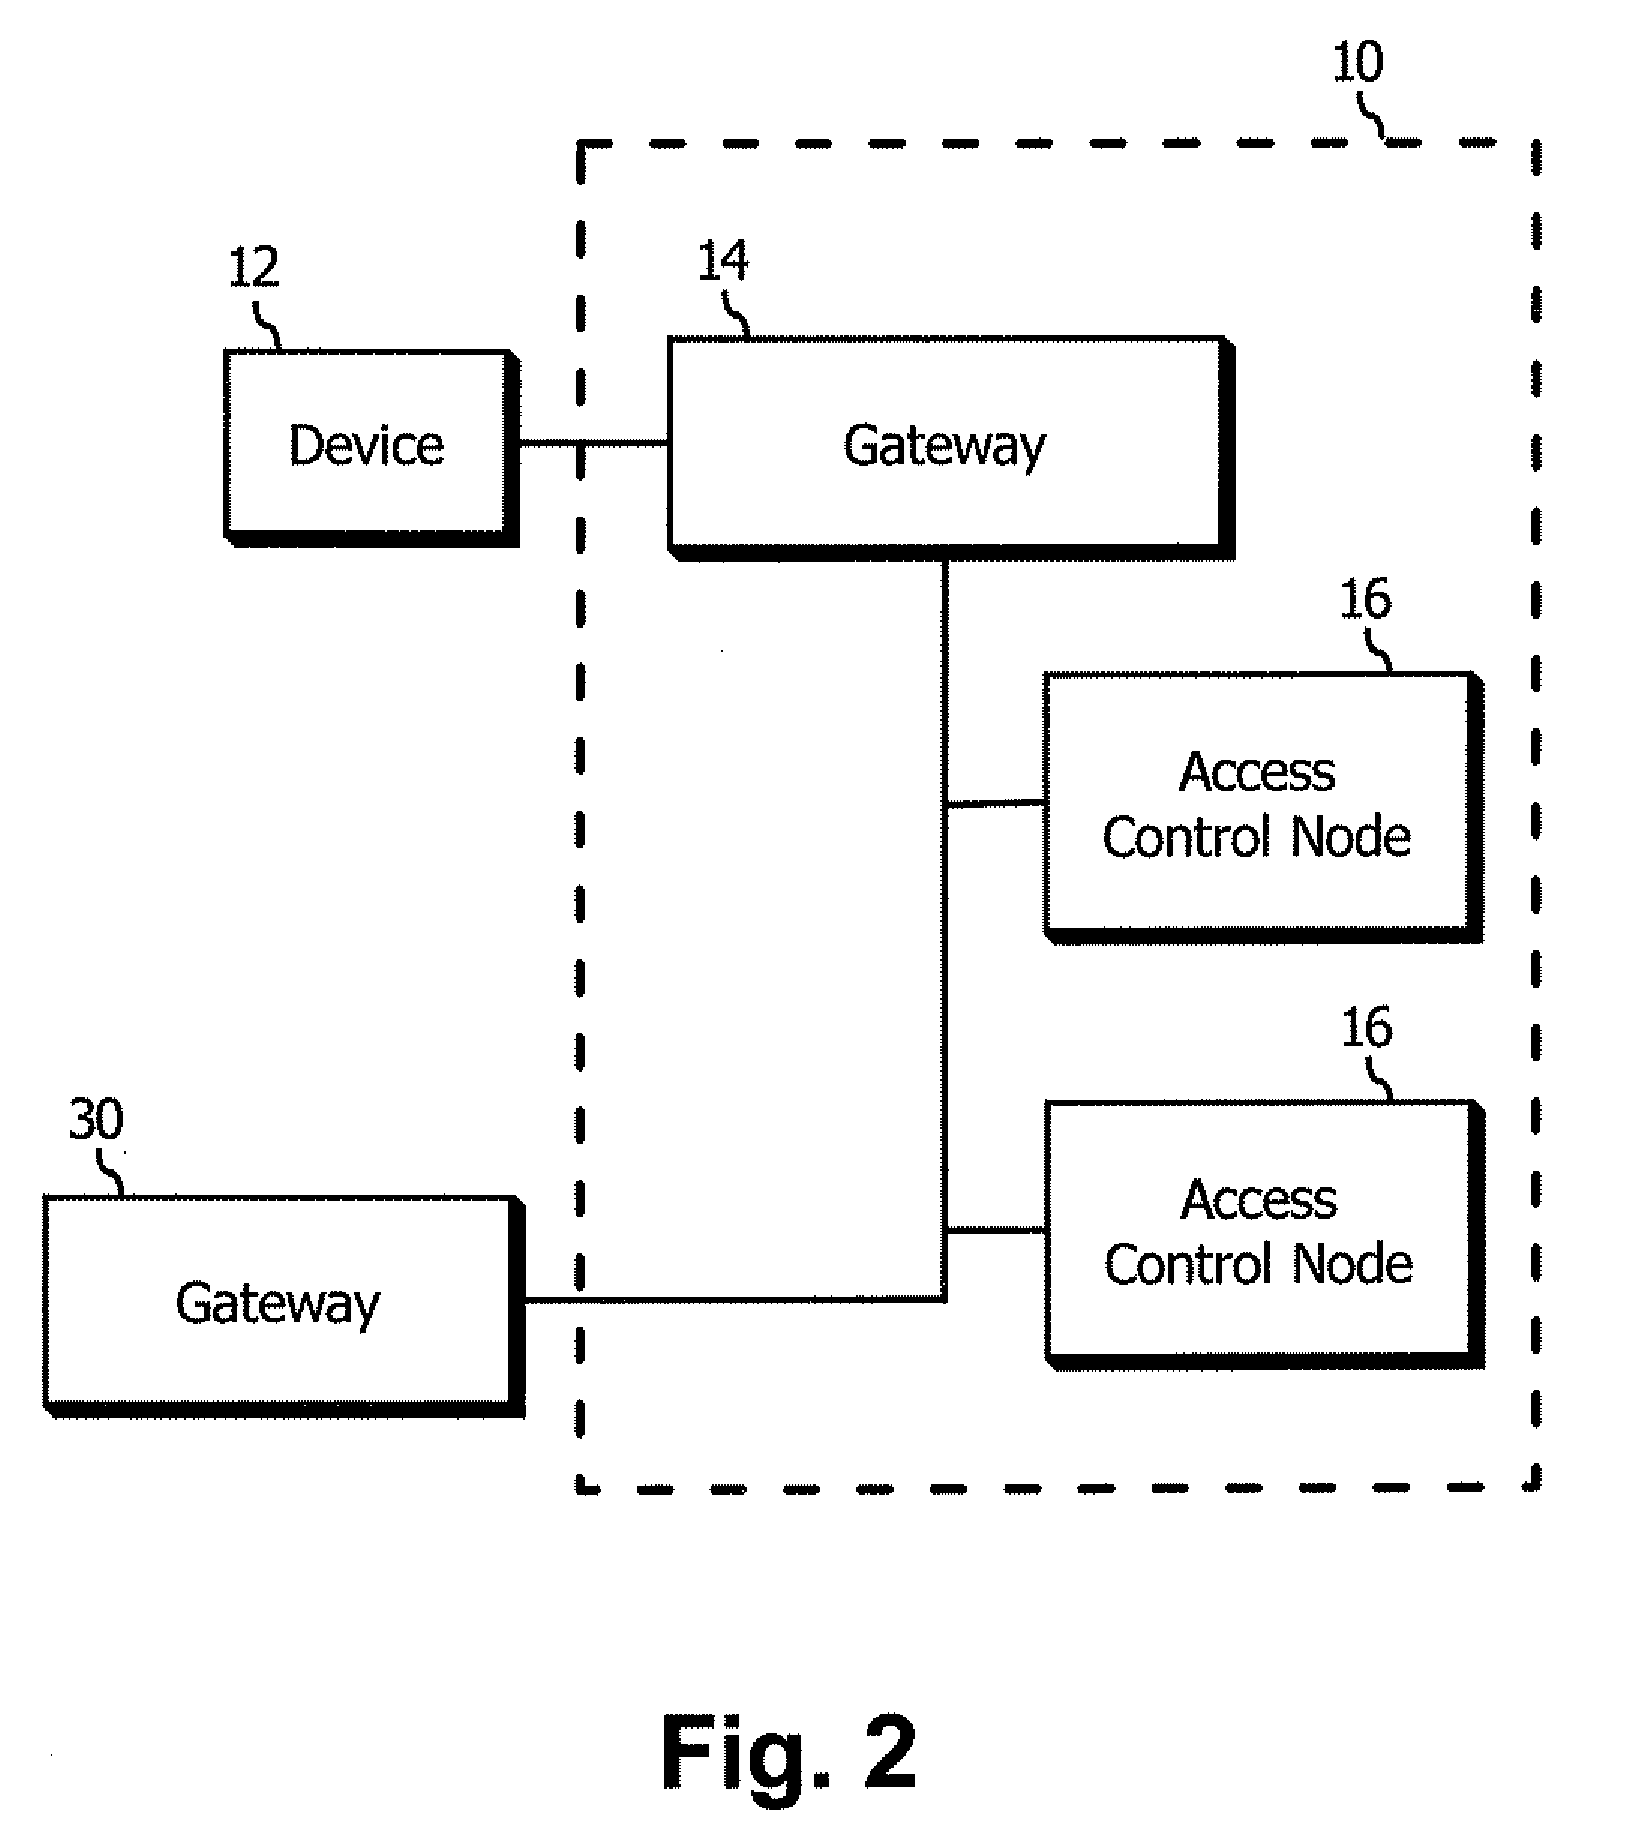 System and method for remotely administering and synchronizing a clustered group of access control panels